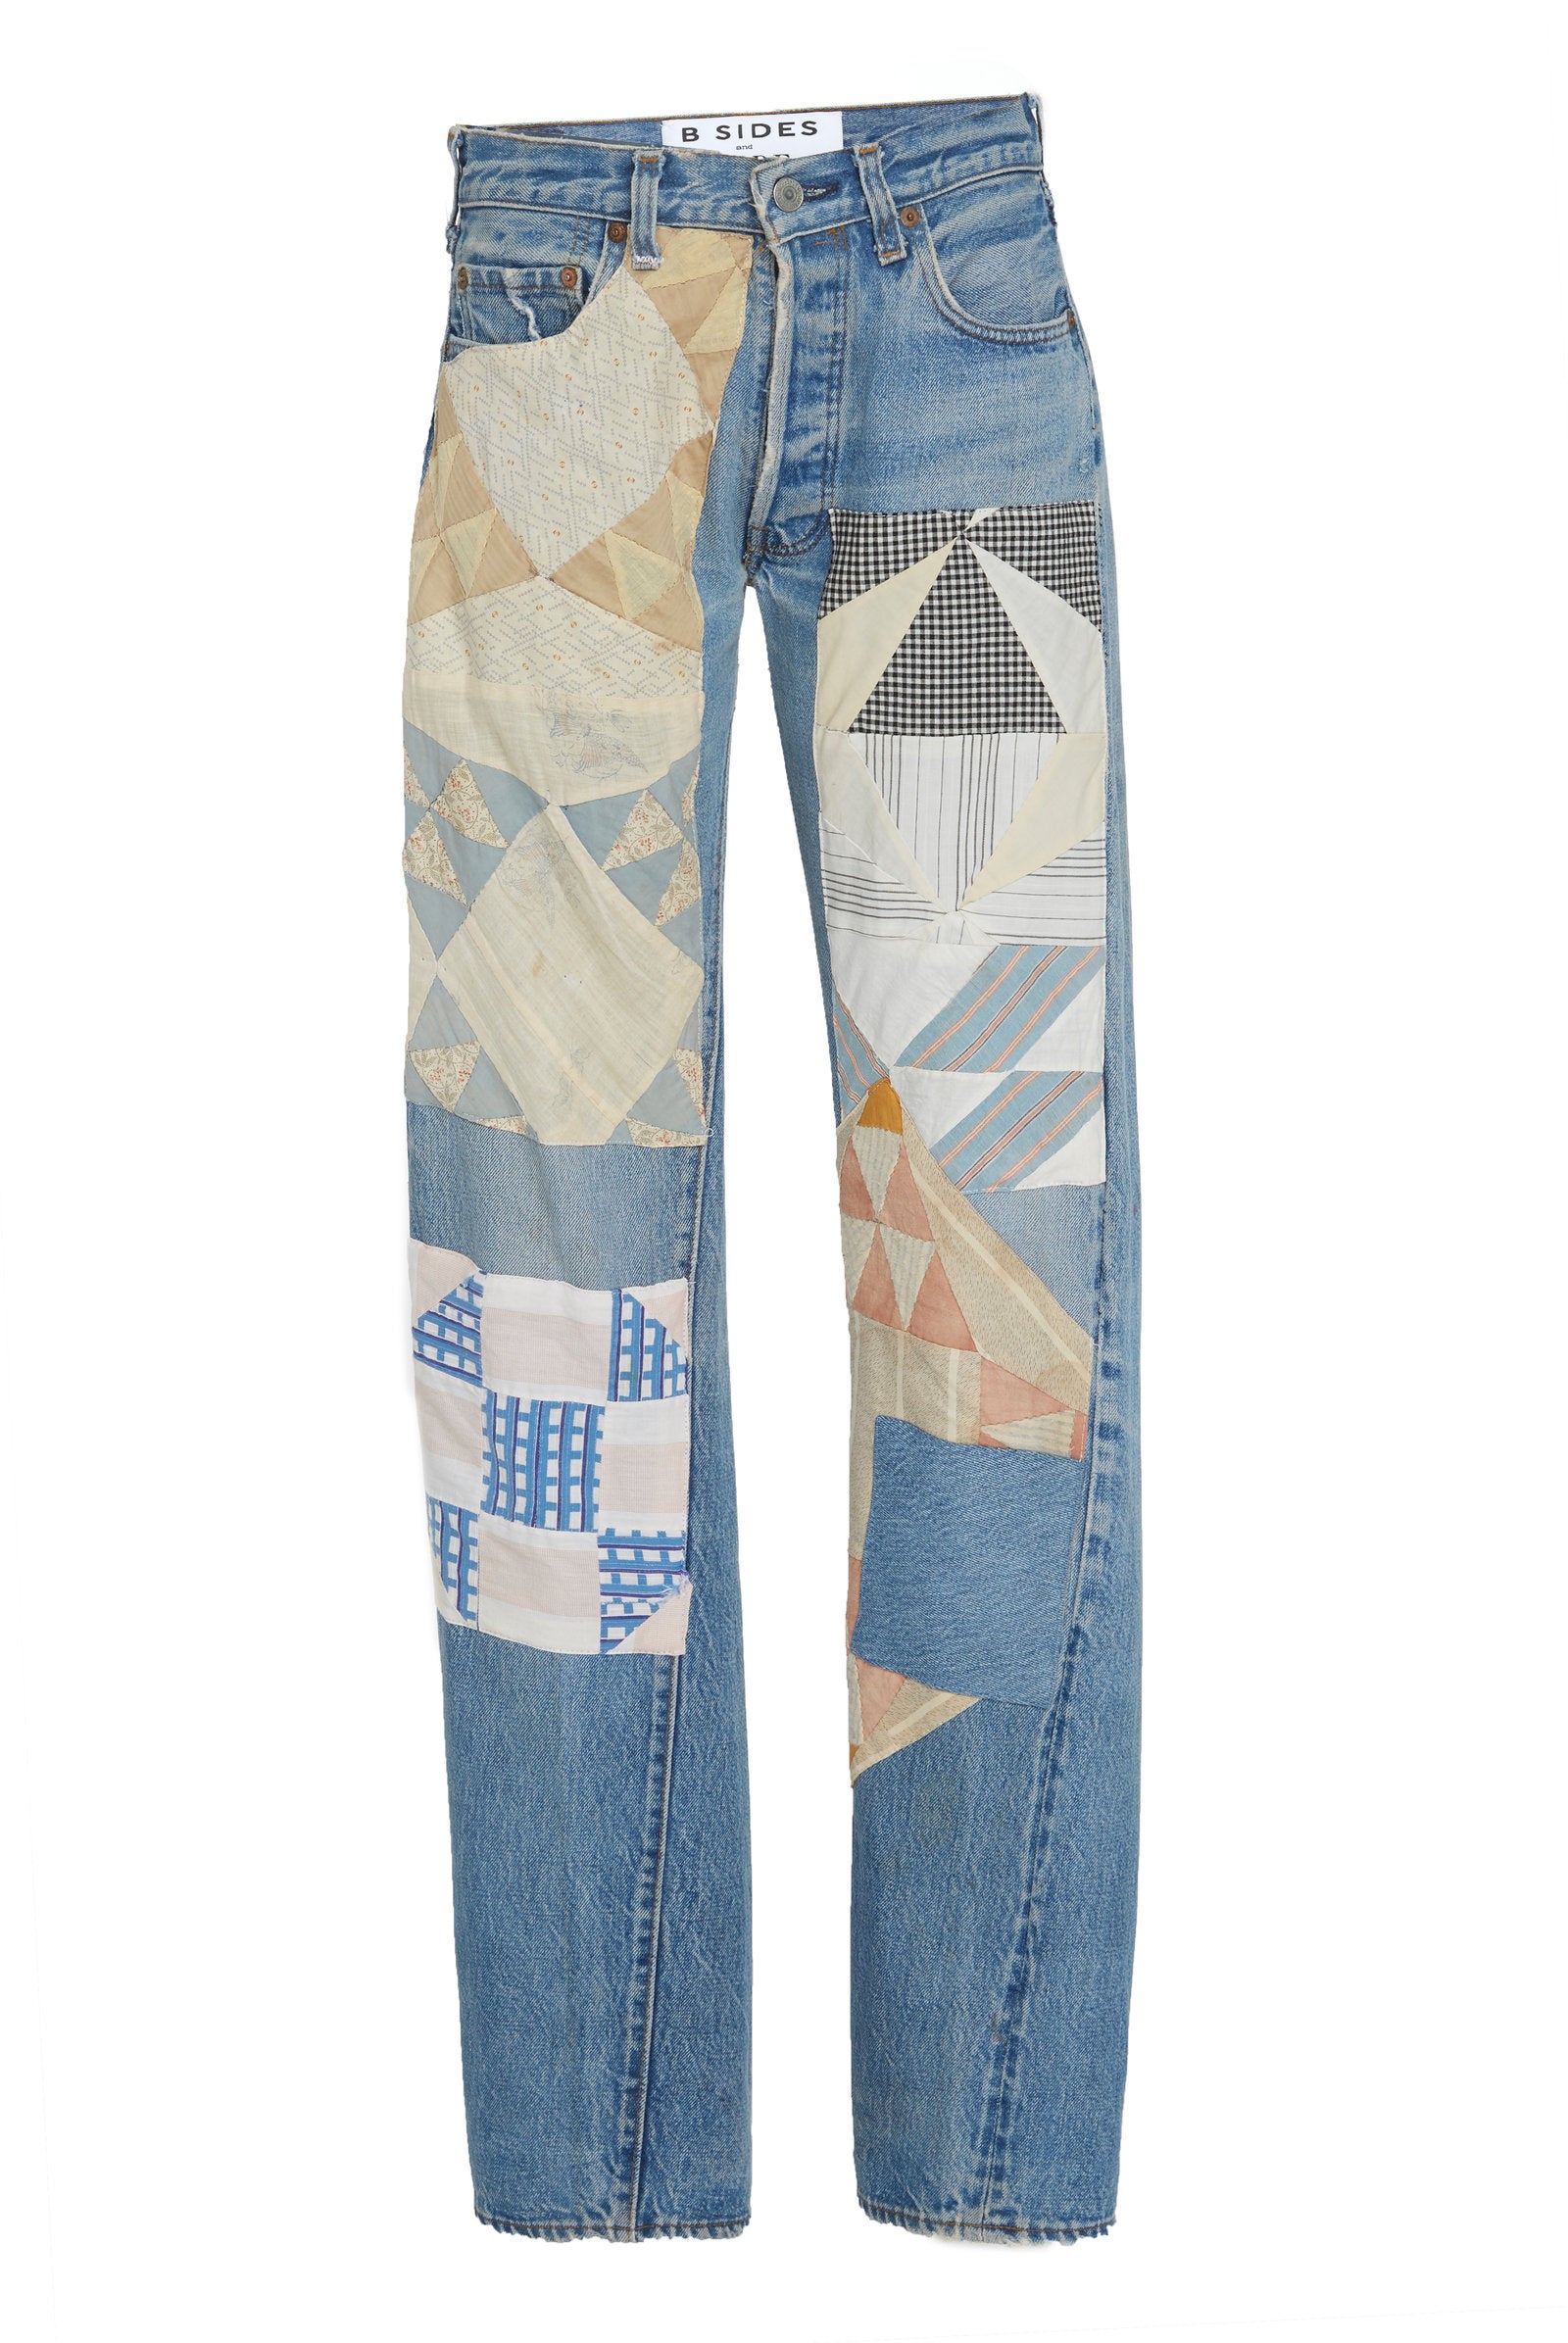 B Sides x Bode + Exclusive Mid-Rise Patchwork Straight-Leg Jeans